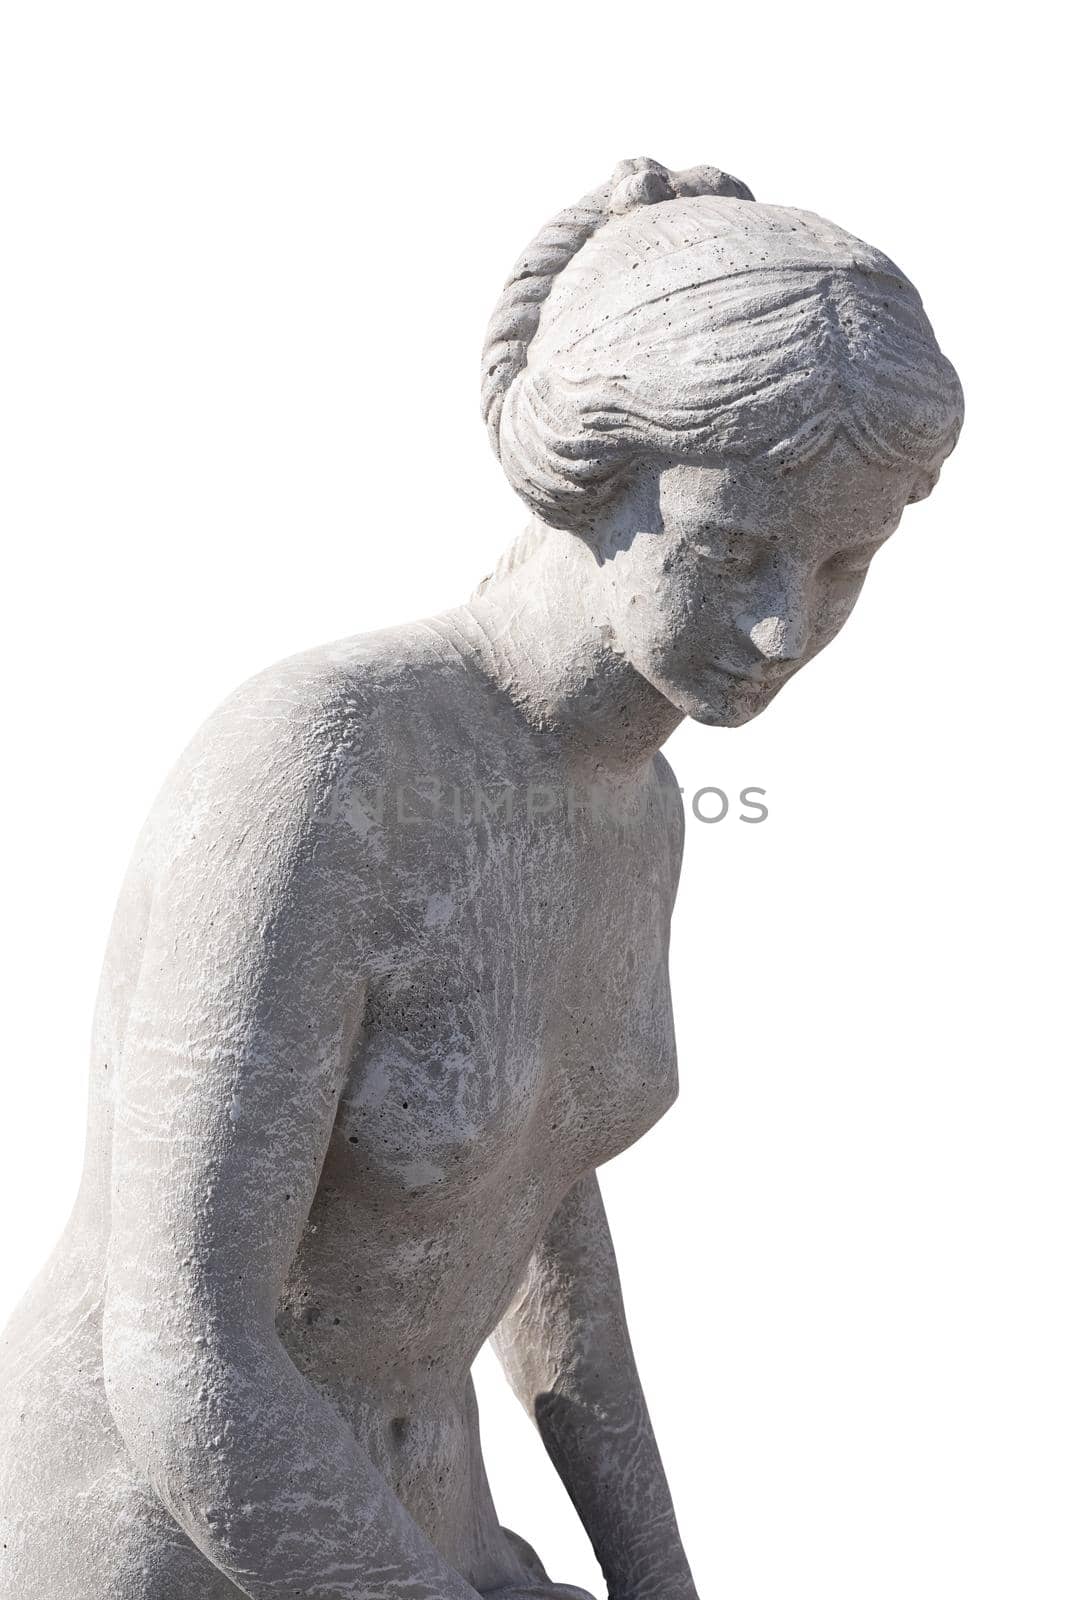 Stone sculpture of upper body of naked woman on white background. art and classical style romantic figurative stone sculpture.